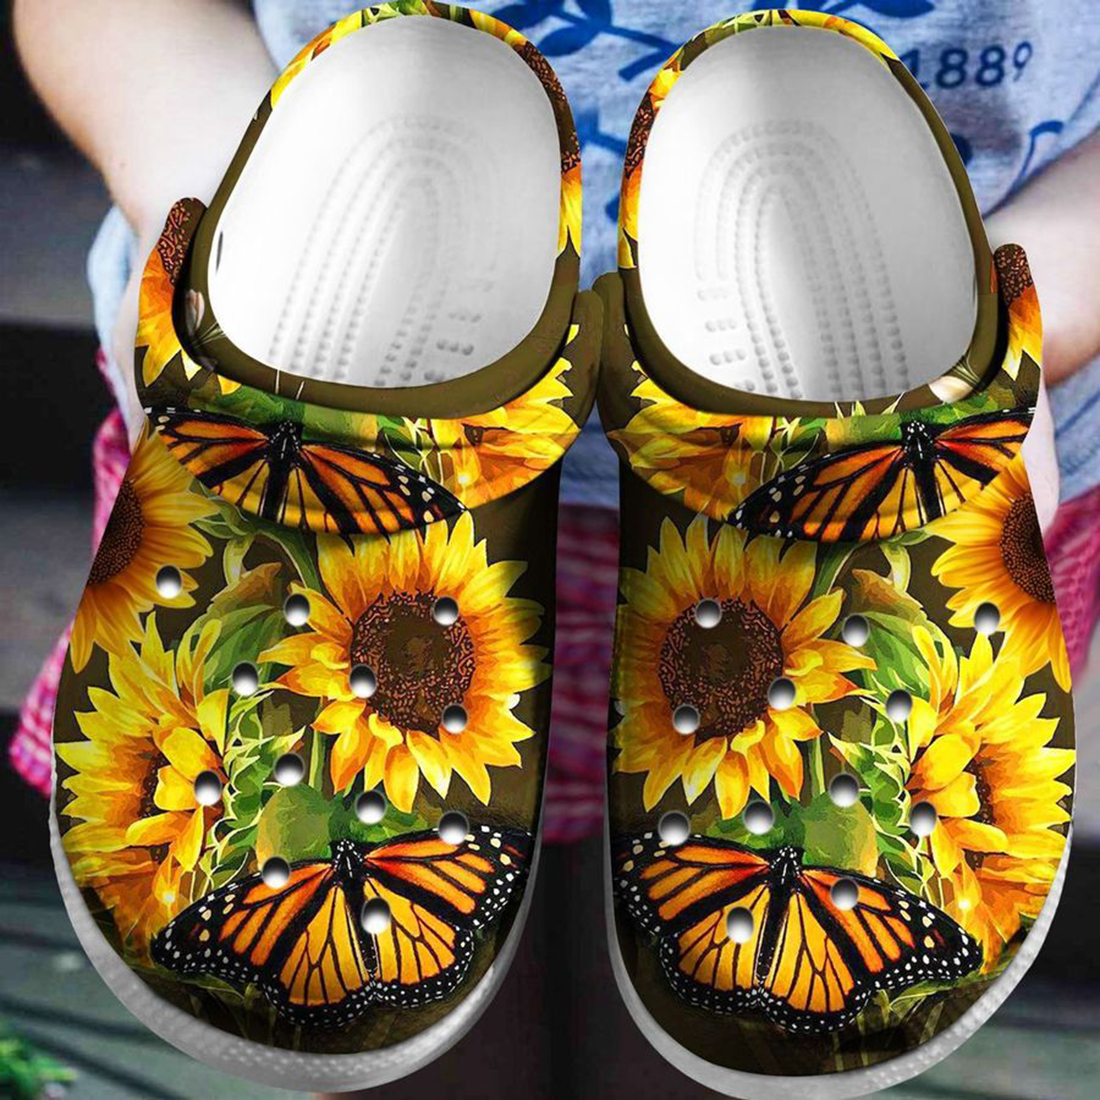 crocs with sunflowers on them